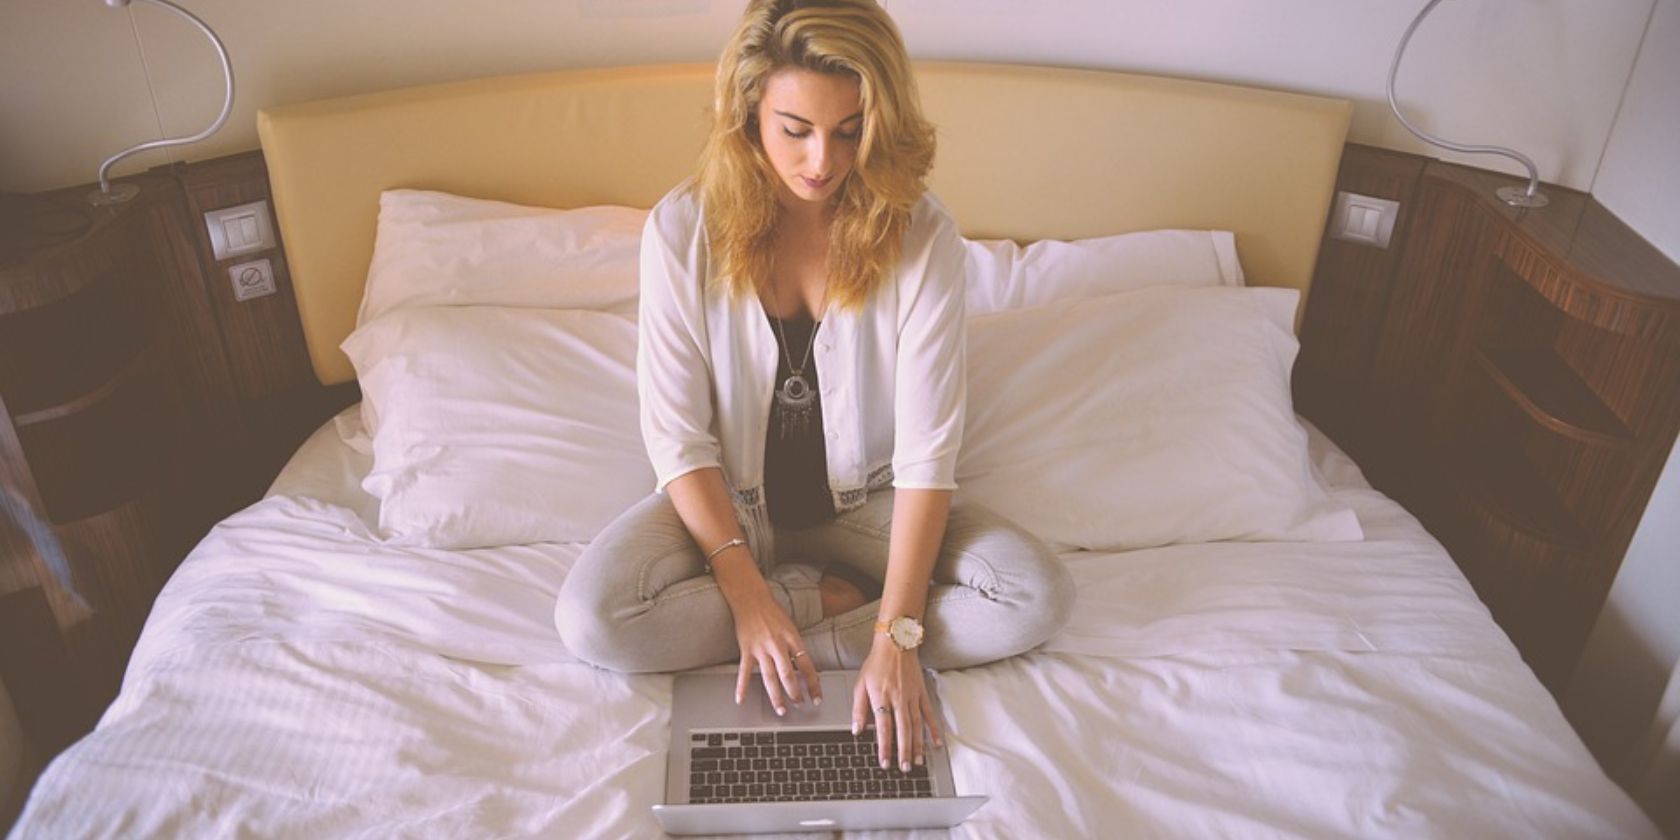 a freelancer woman on a bed using a laptop